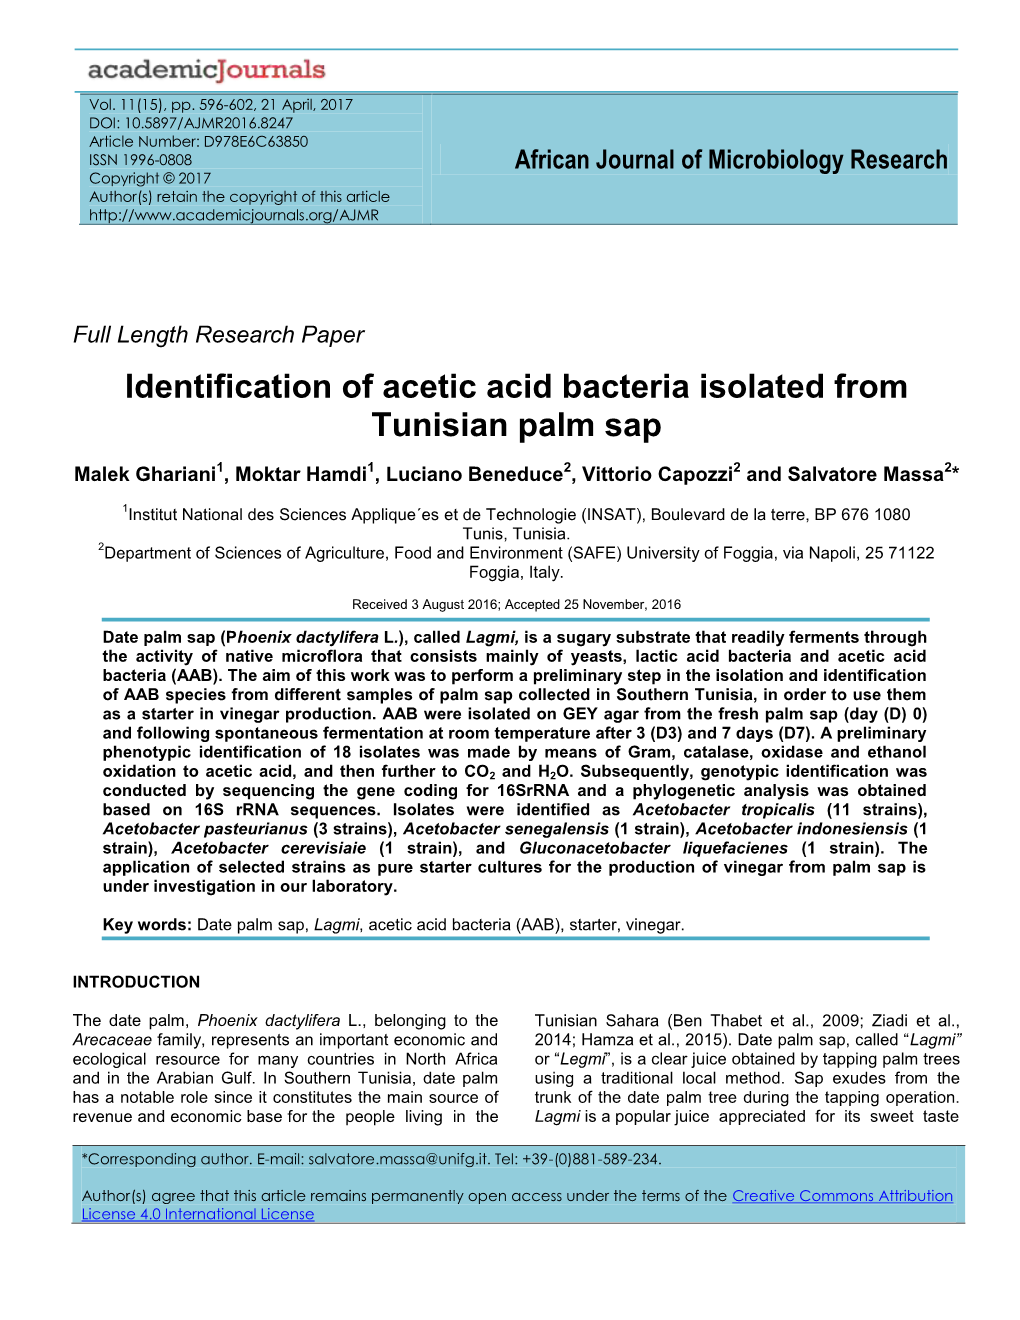 Identification of Acetic Acid Bacteria Isolated from Tunisian Palm Sap